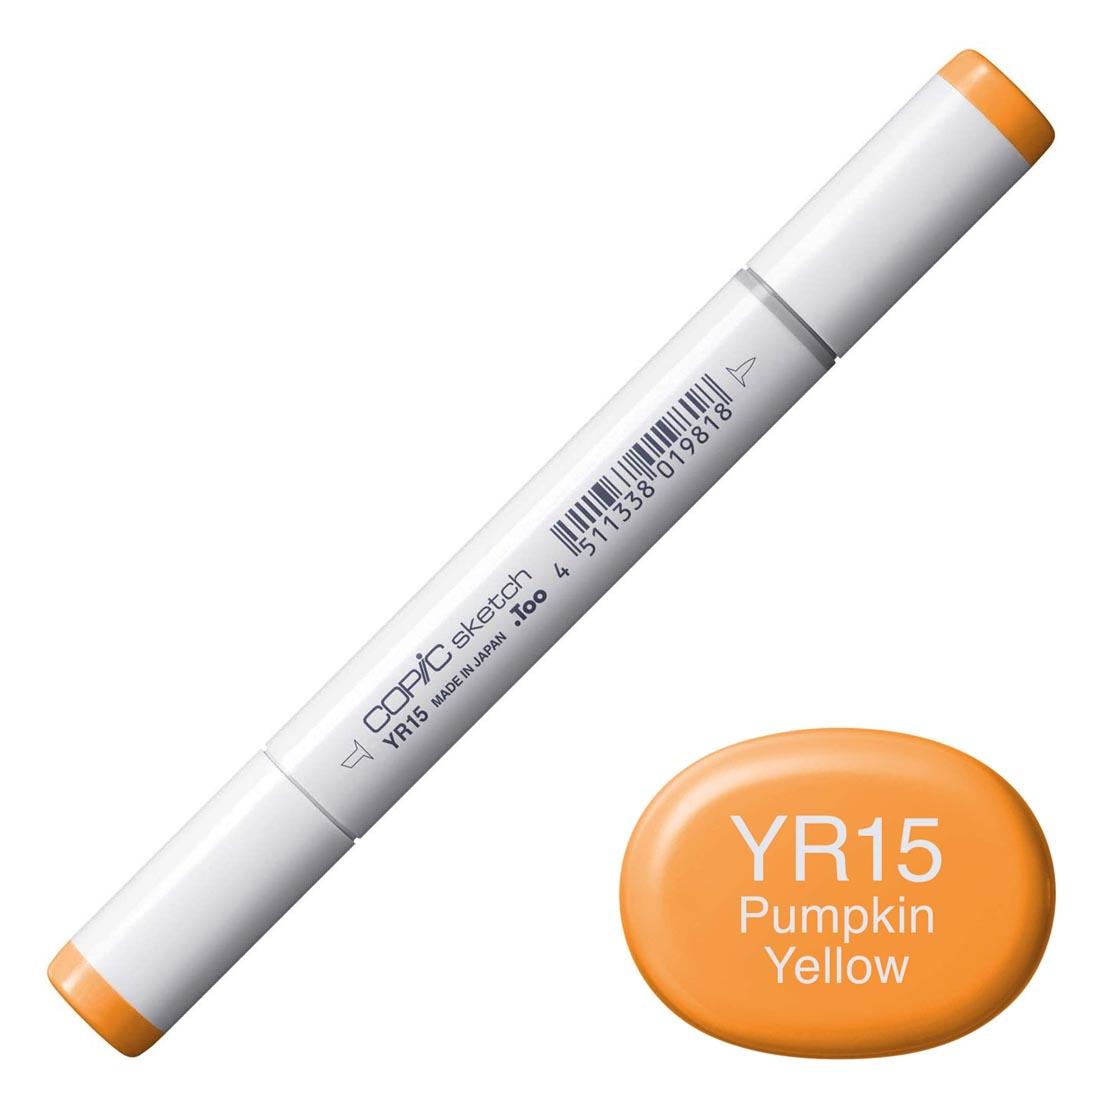 COPIC Sketch Marker with a color swatch and text of YR15 Pumpkin Yellow